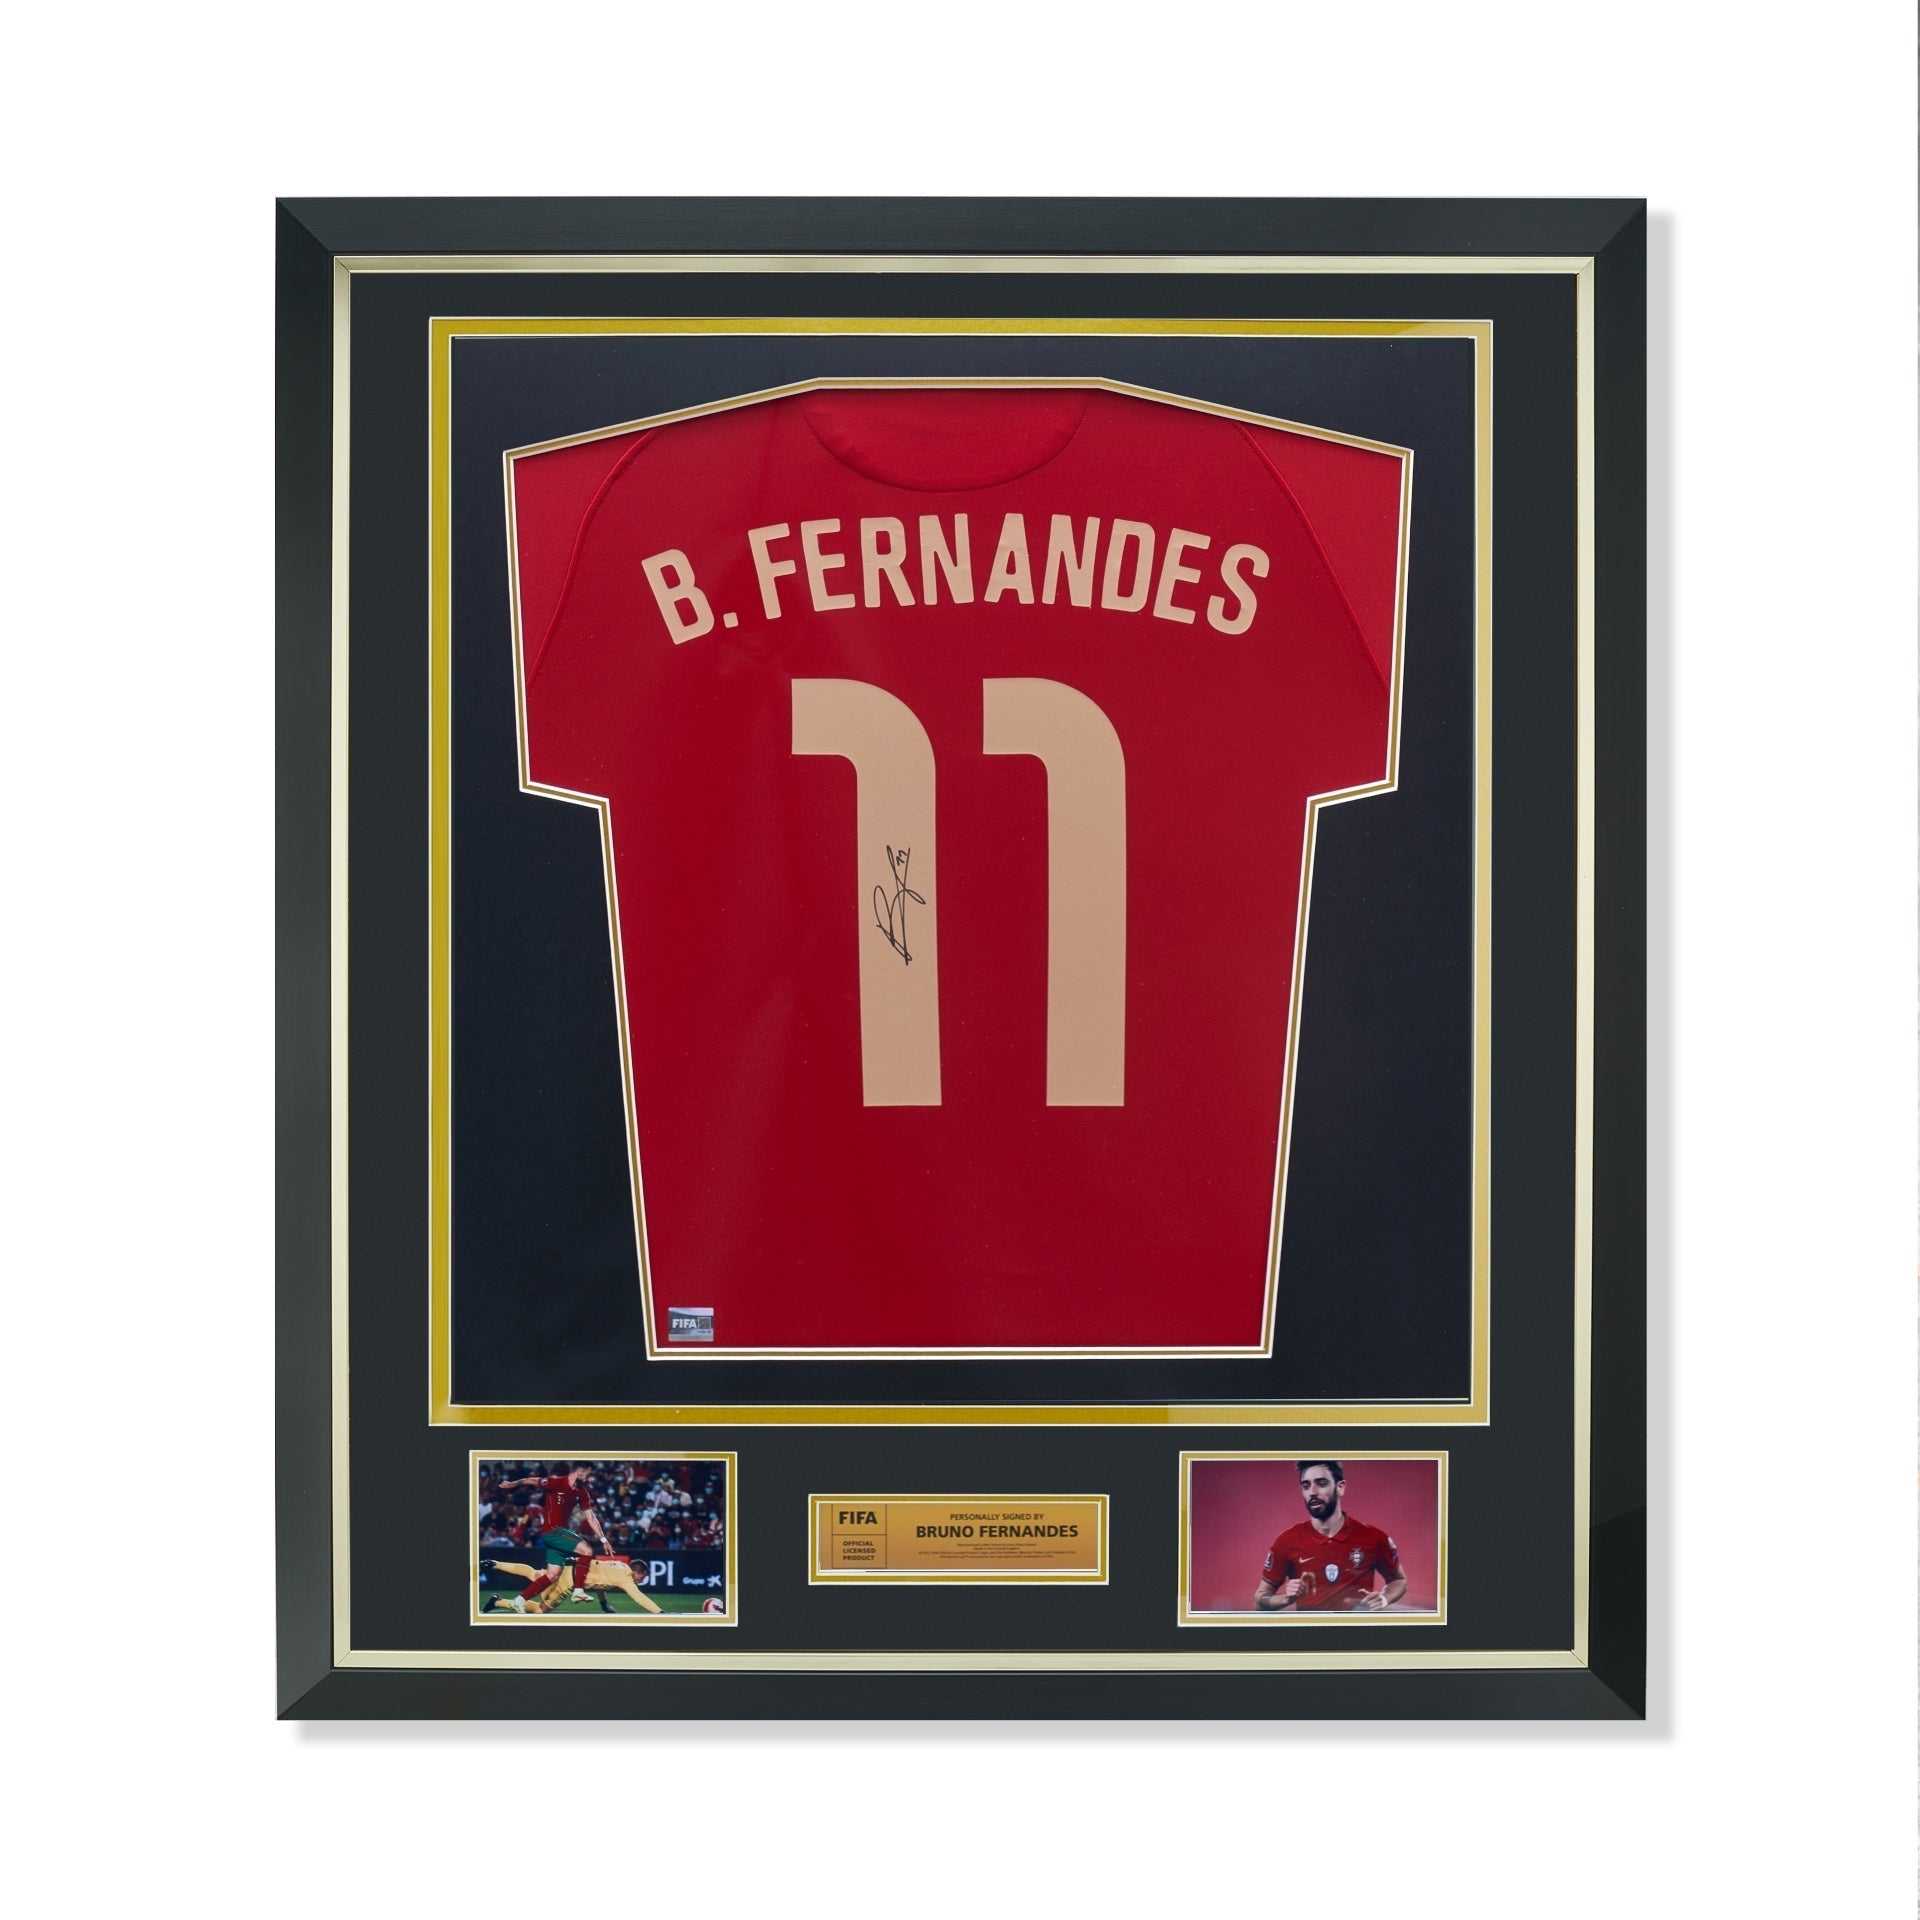 FIFA World Cup Bruno Fernandes Official Signed And Framed Portugal 2020-21 Home Shirt